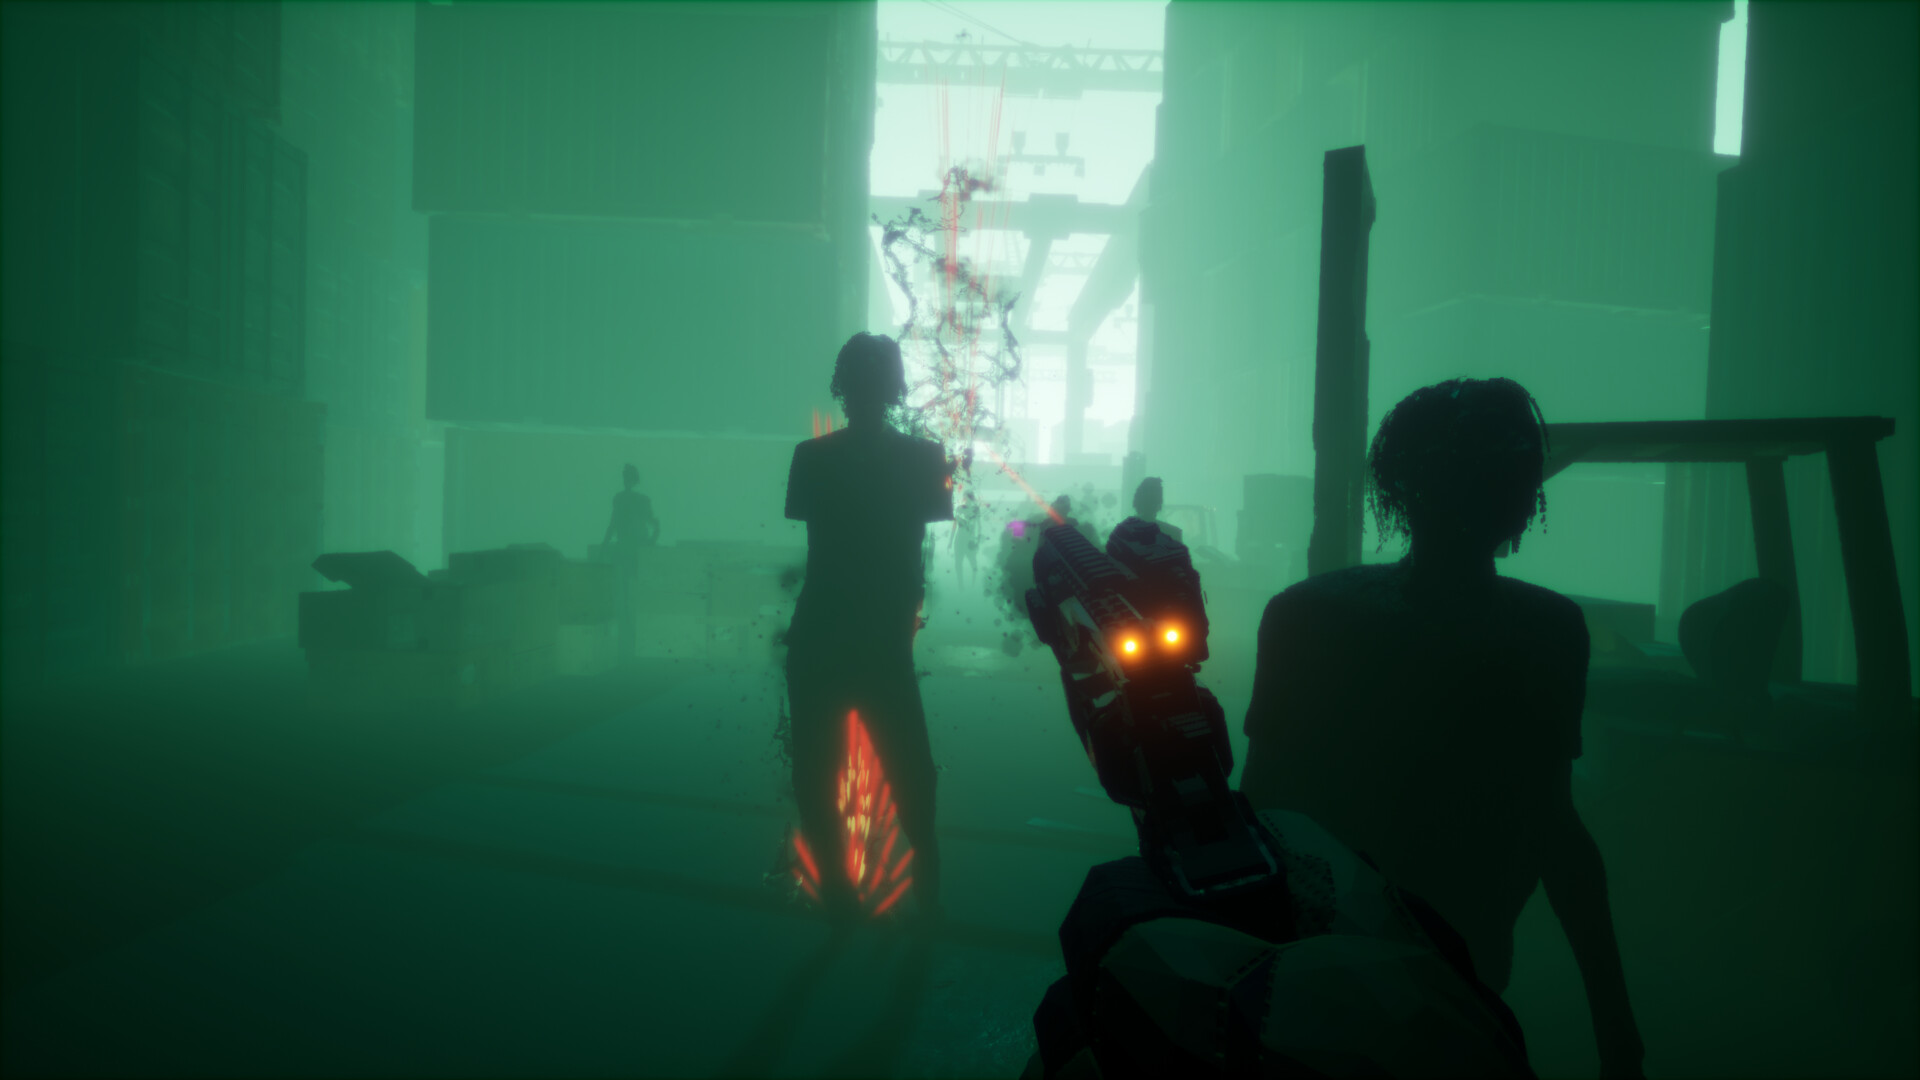 Prion: Infection on Steam